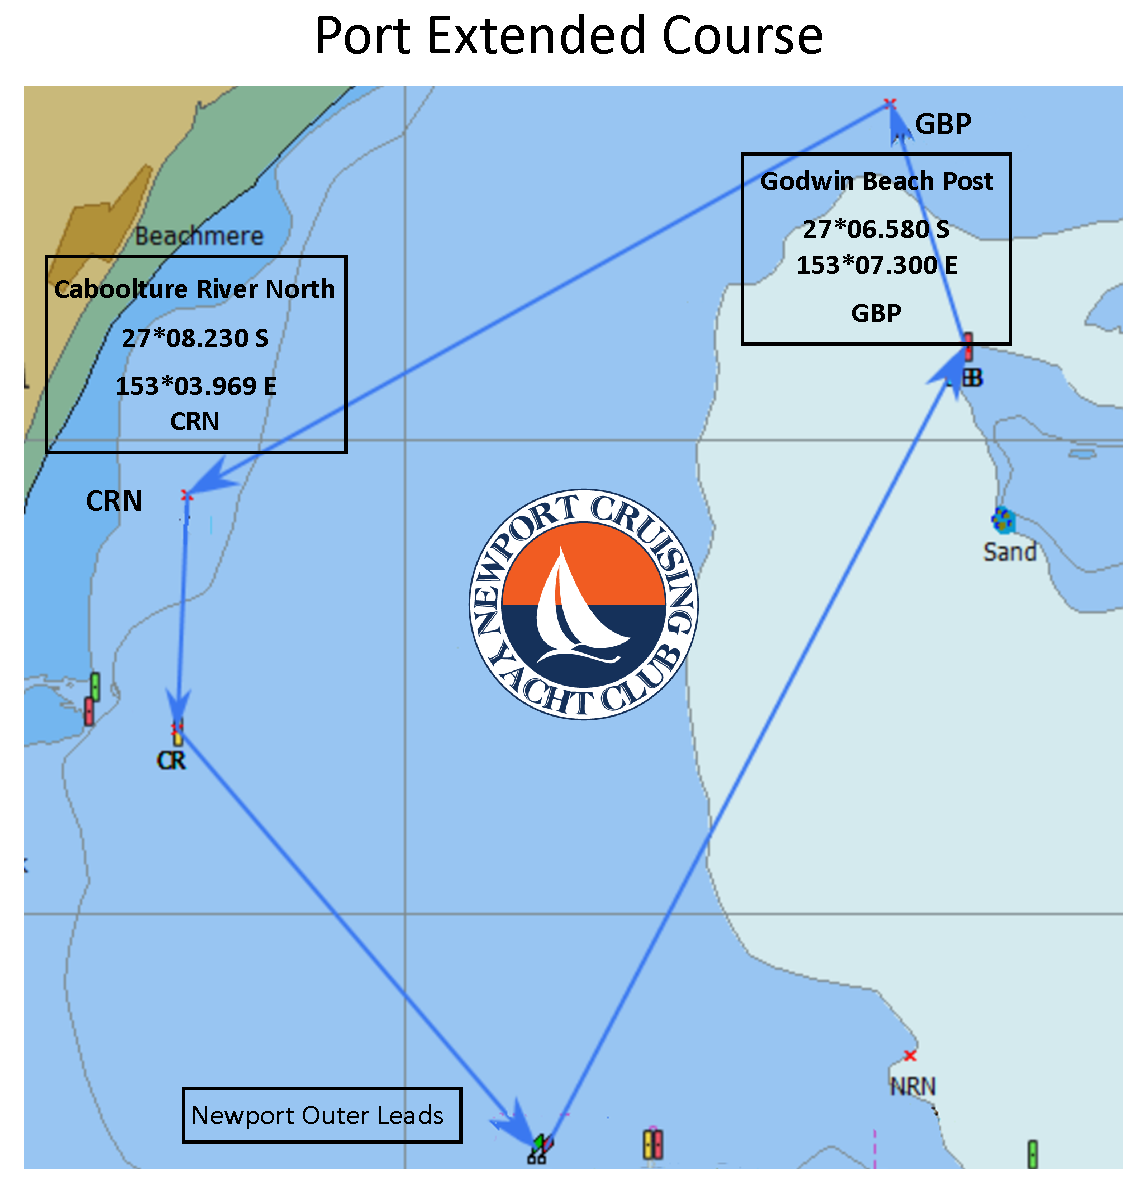 Port Extended Course